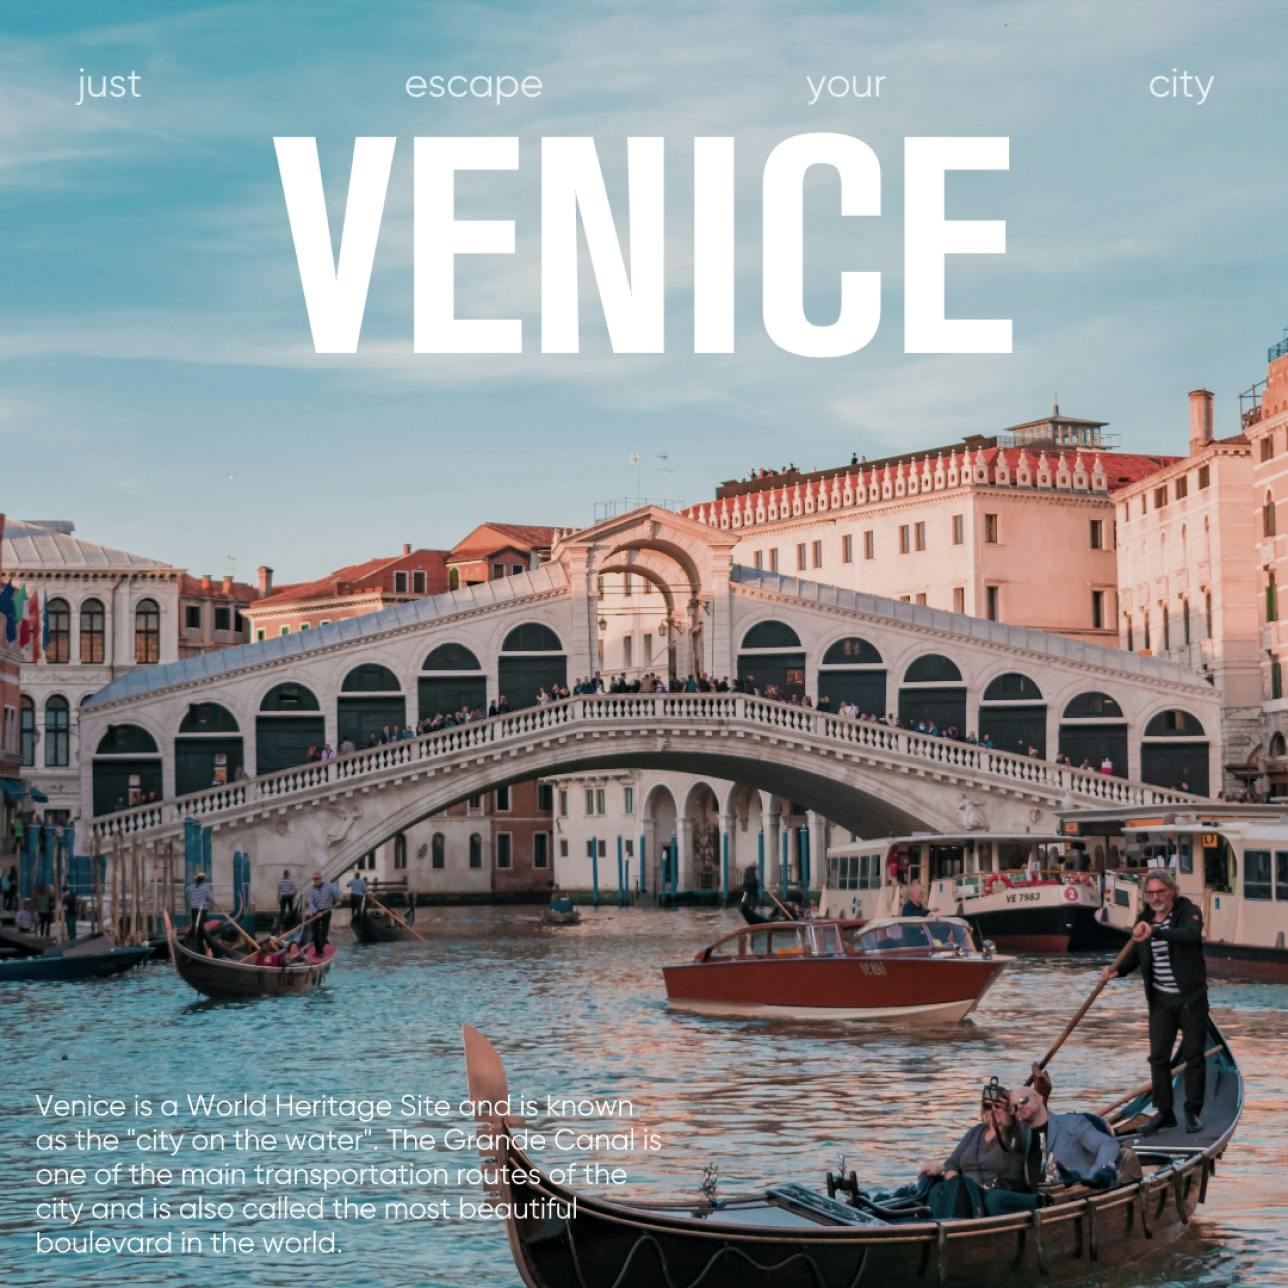 Scavenger hunt through Venice with your phone Musement